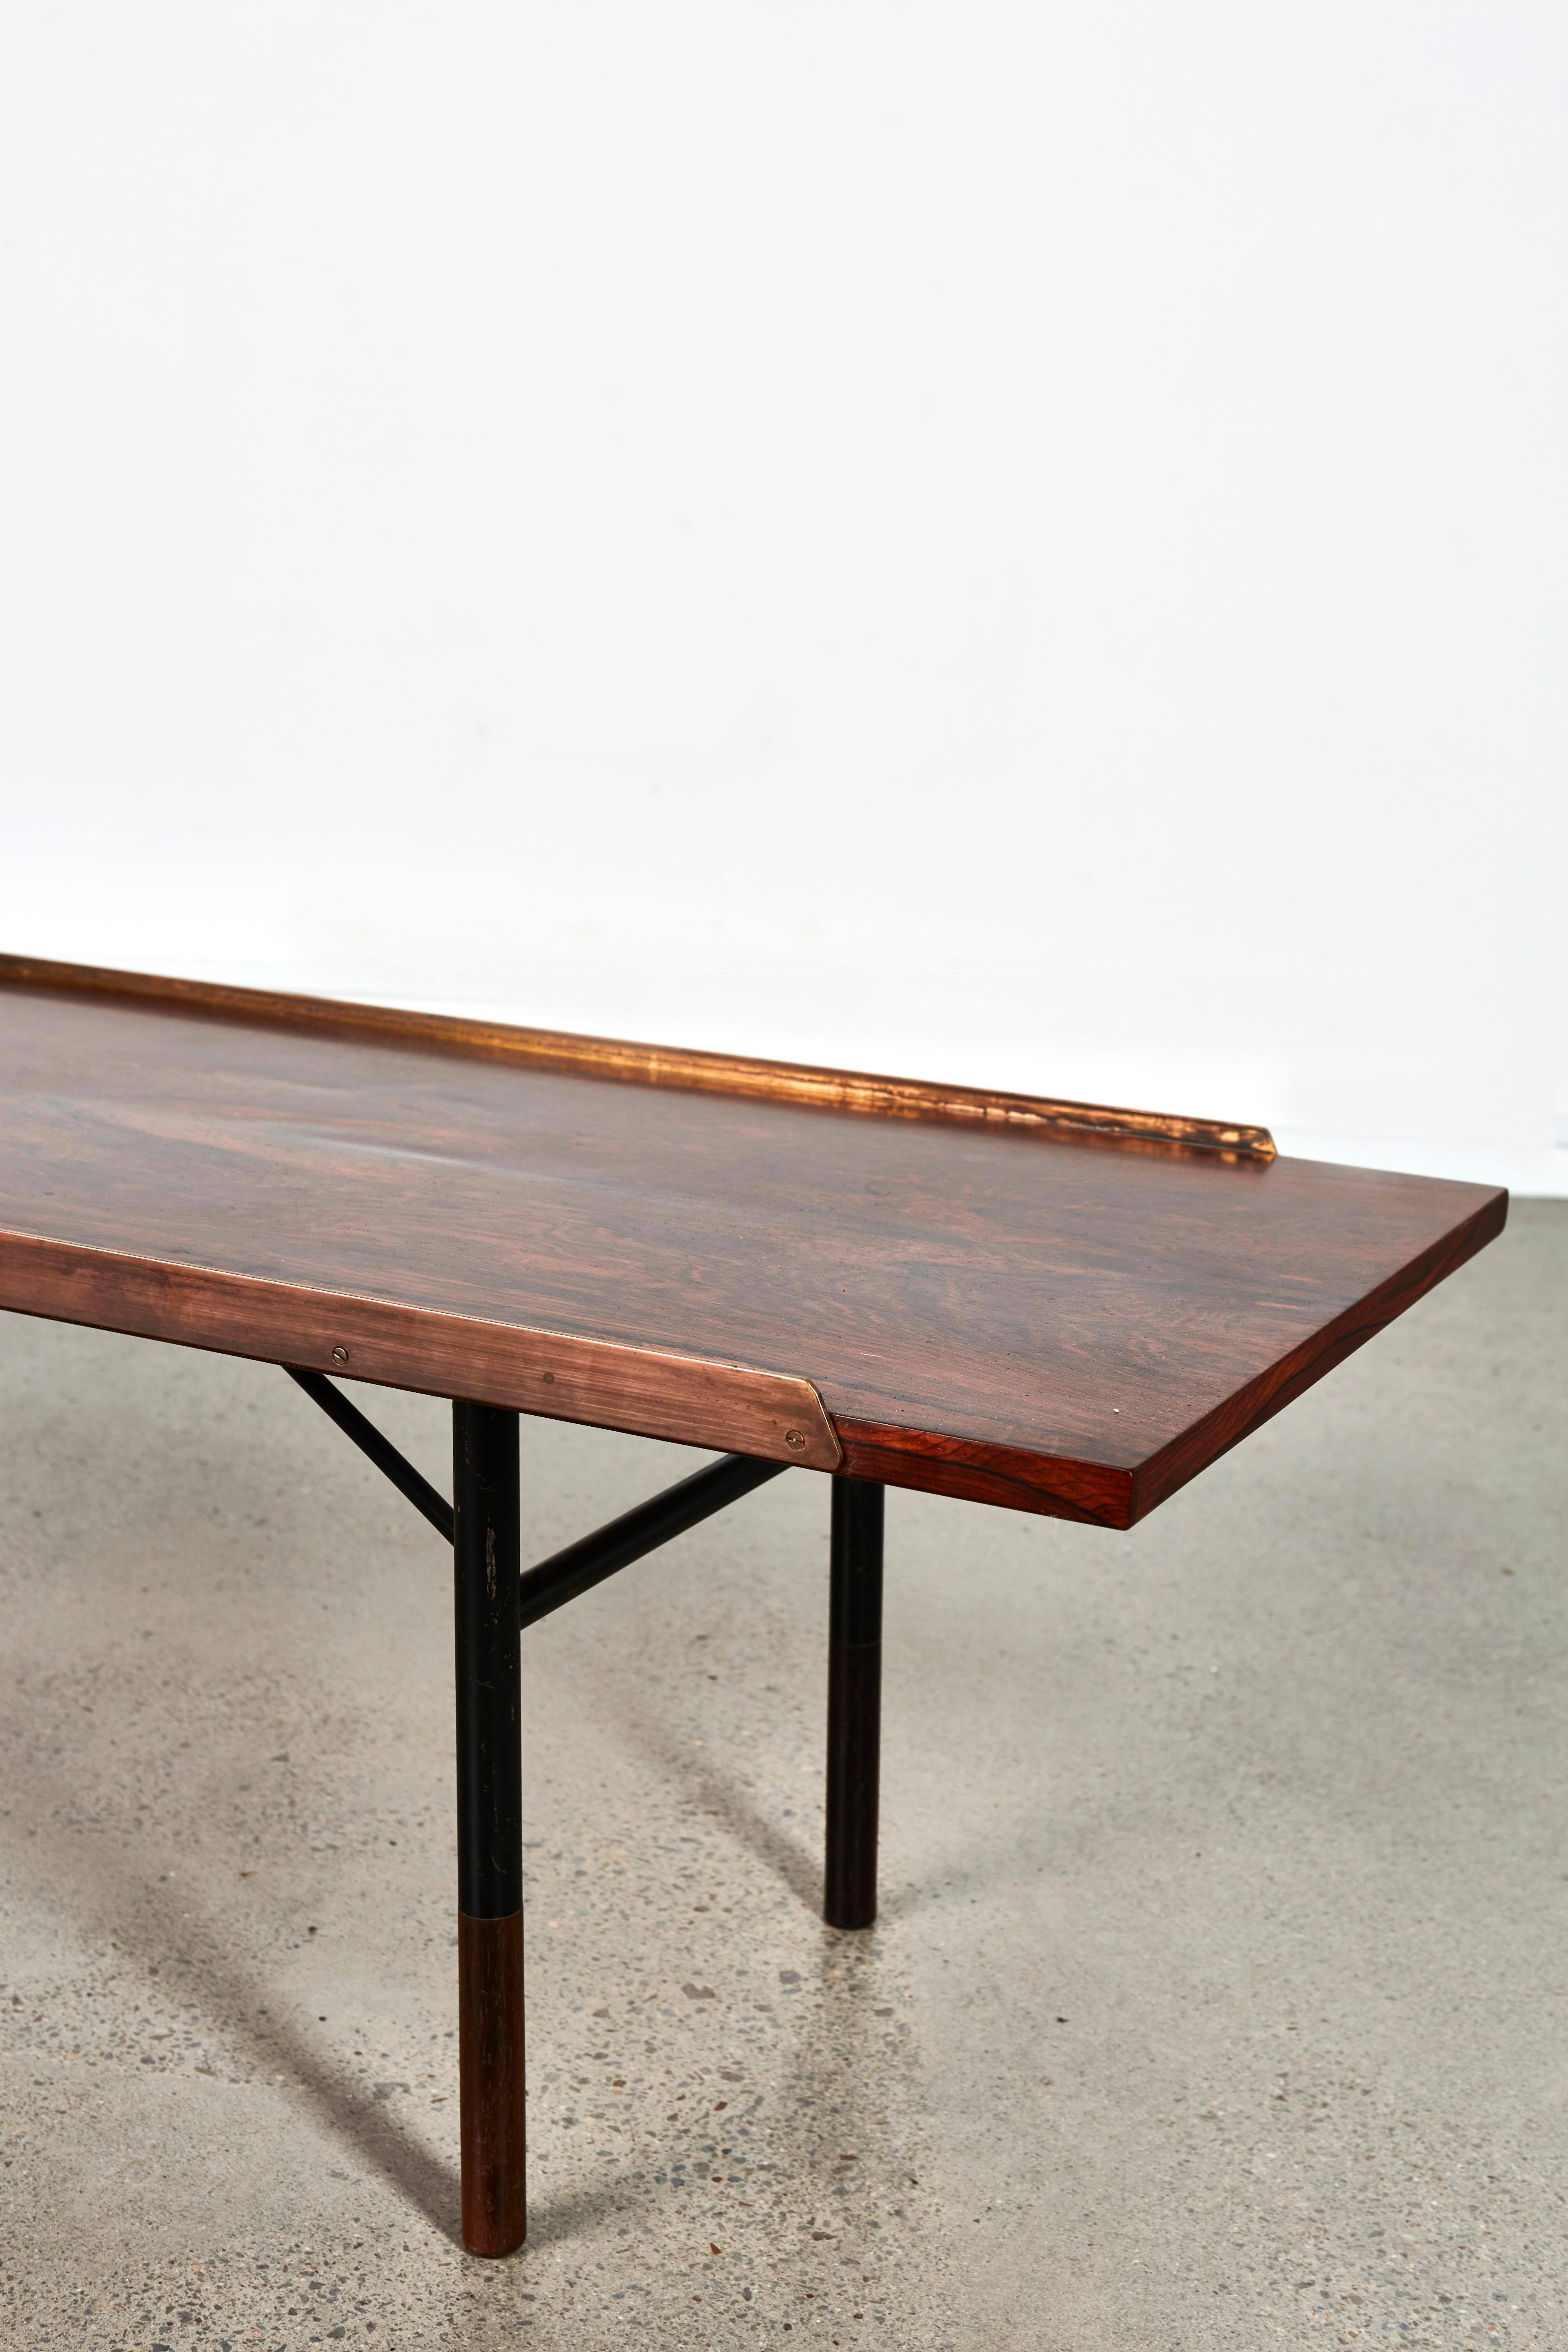 Beautiful bench designed by Finn Juhl for Bovirke in 1953 with anodized steel frame, rosewood and raised brass edges. Conceived by Juhl to be used as a bench and/or coffee table. 

This is the largest model and incredibly hard to find. An absolute